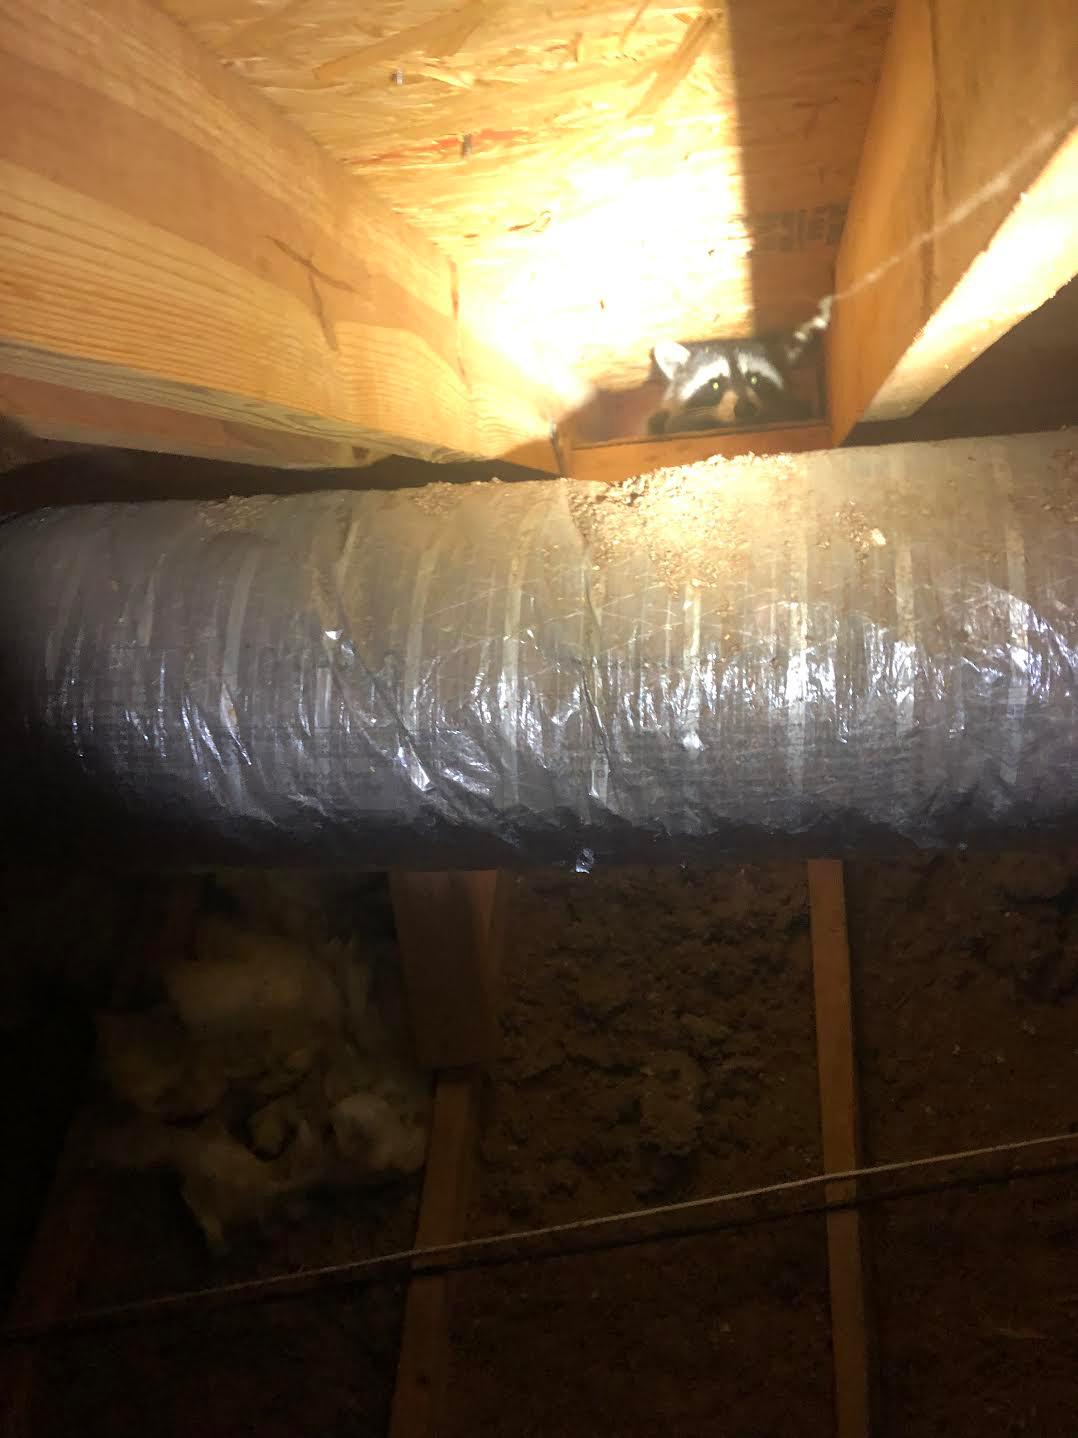 We found this raccoon in an attic in Blythewood, South Carolina. Experiencing A Wildlife Or Pest Issue? We Can Help!